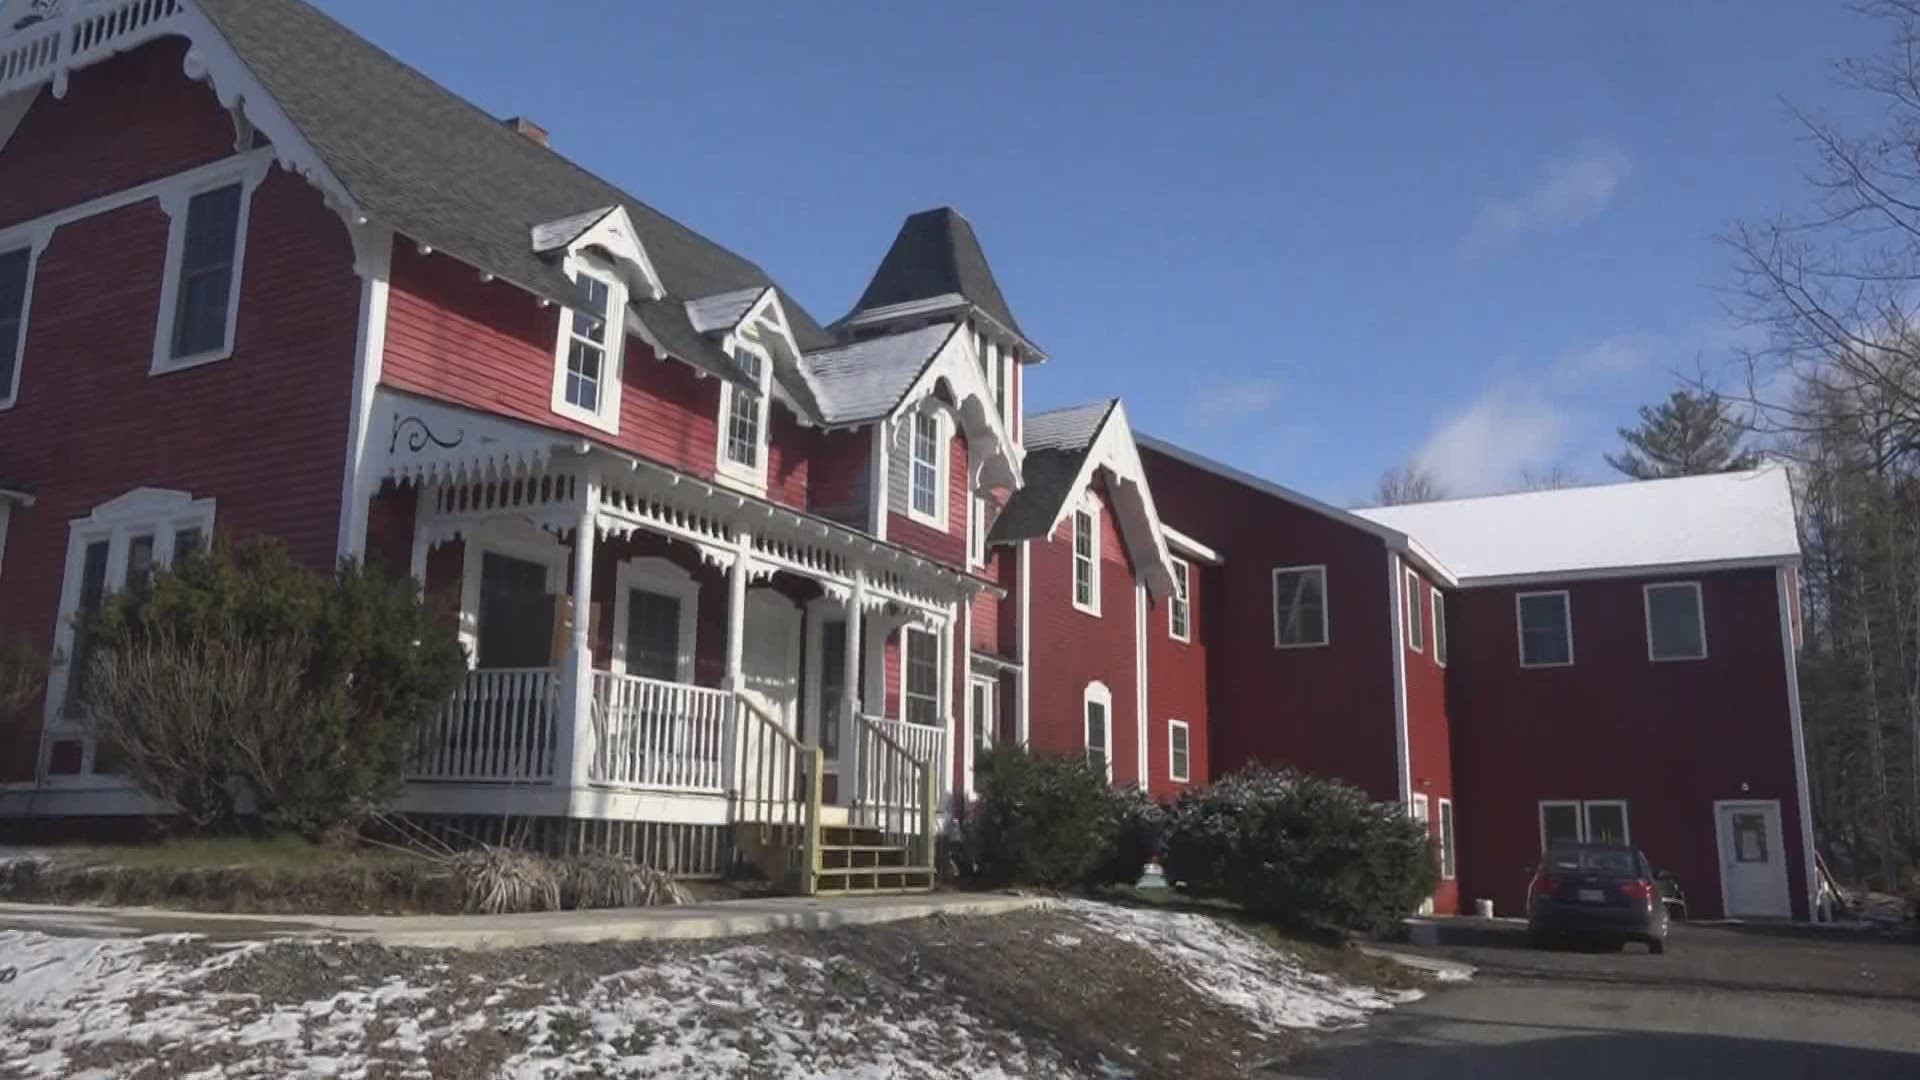 The Families First Community Center renovated a Victorian house in Ellsworth to house homeless families and offer resources to help them make a life plan.